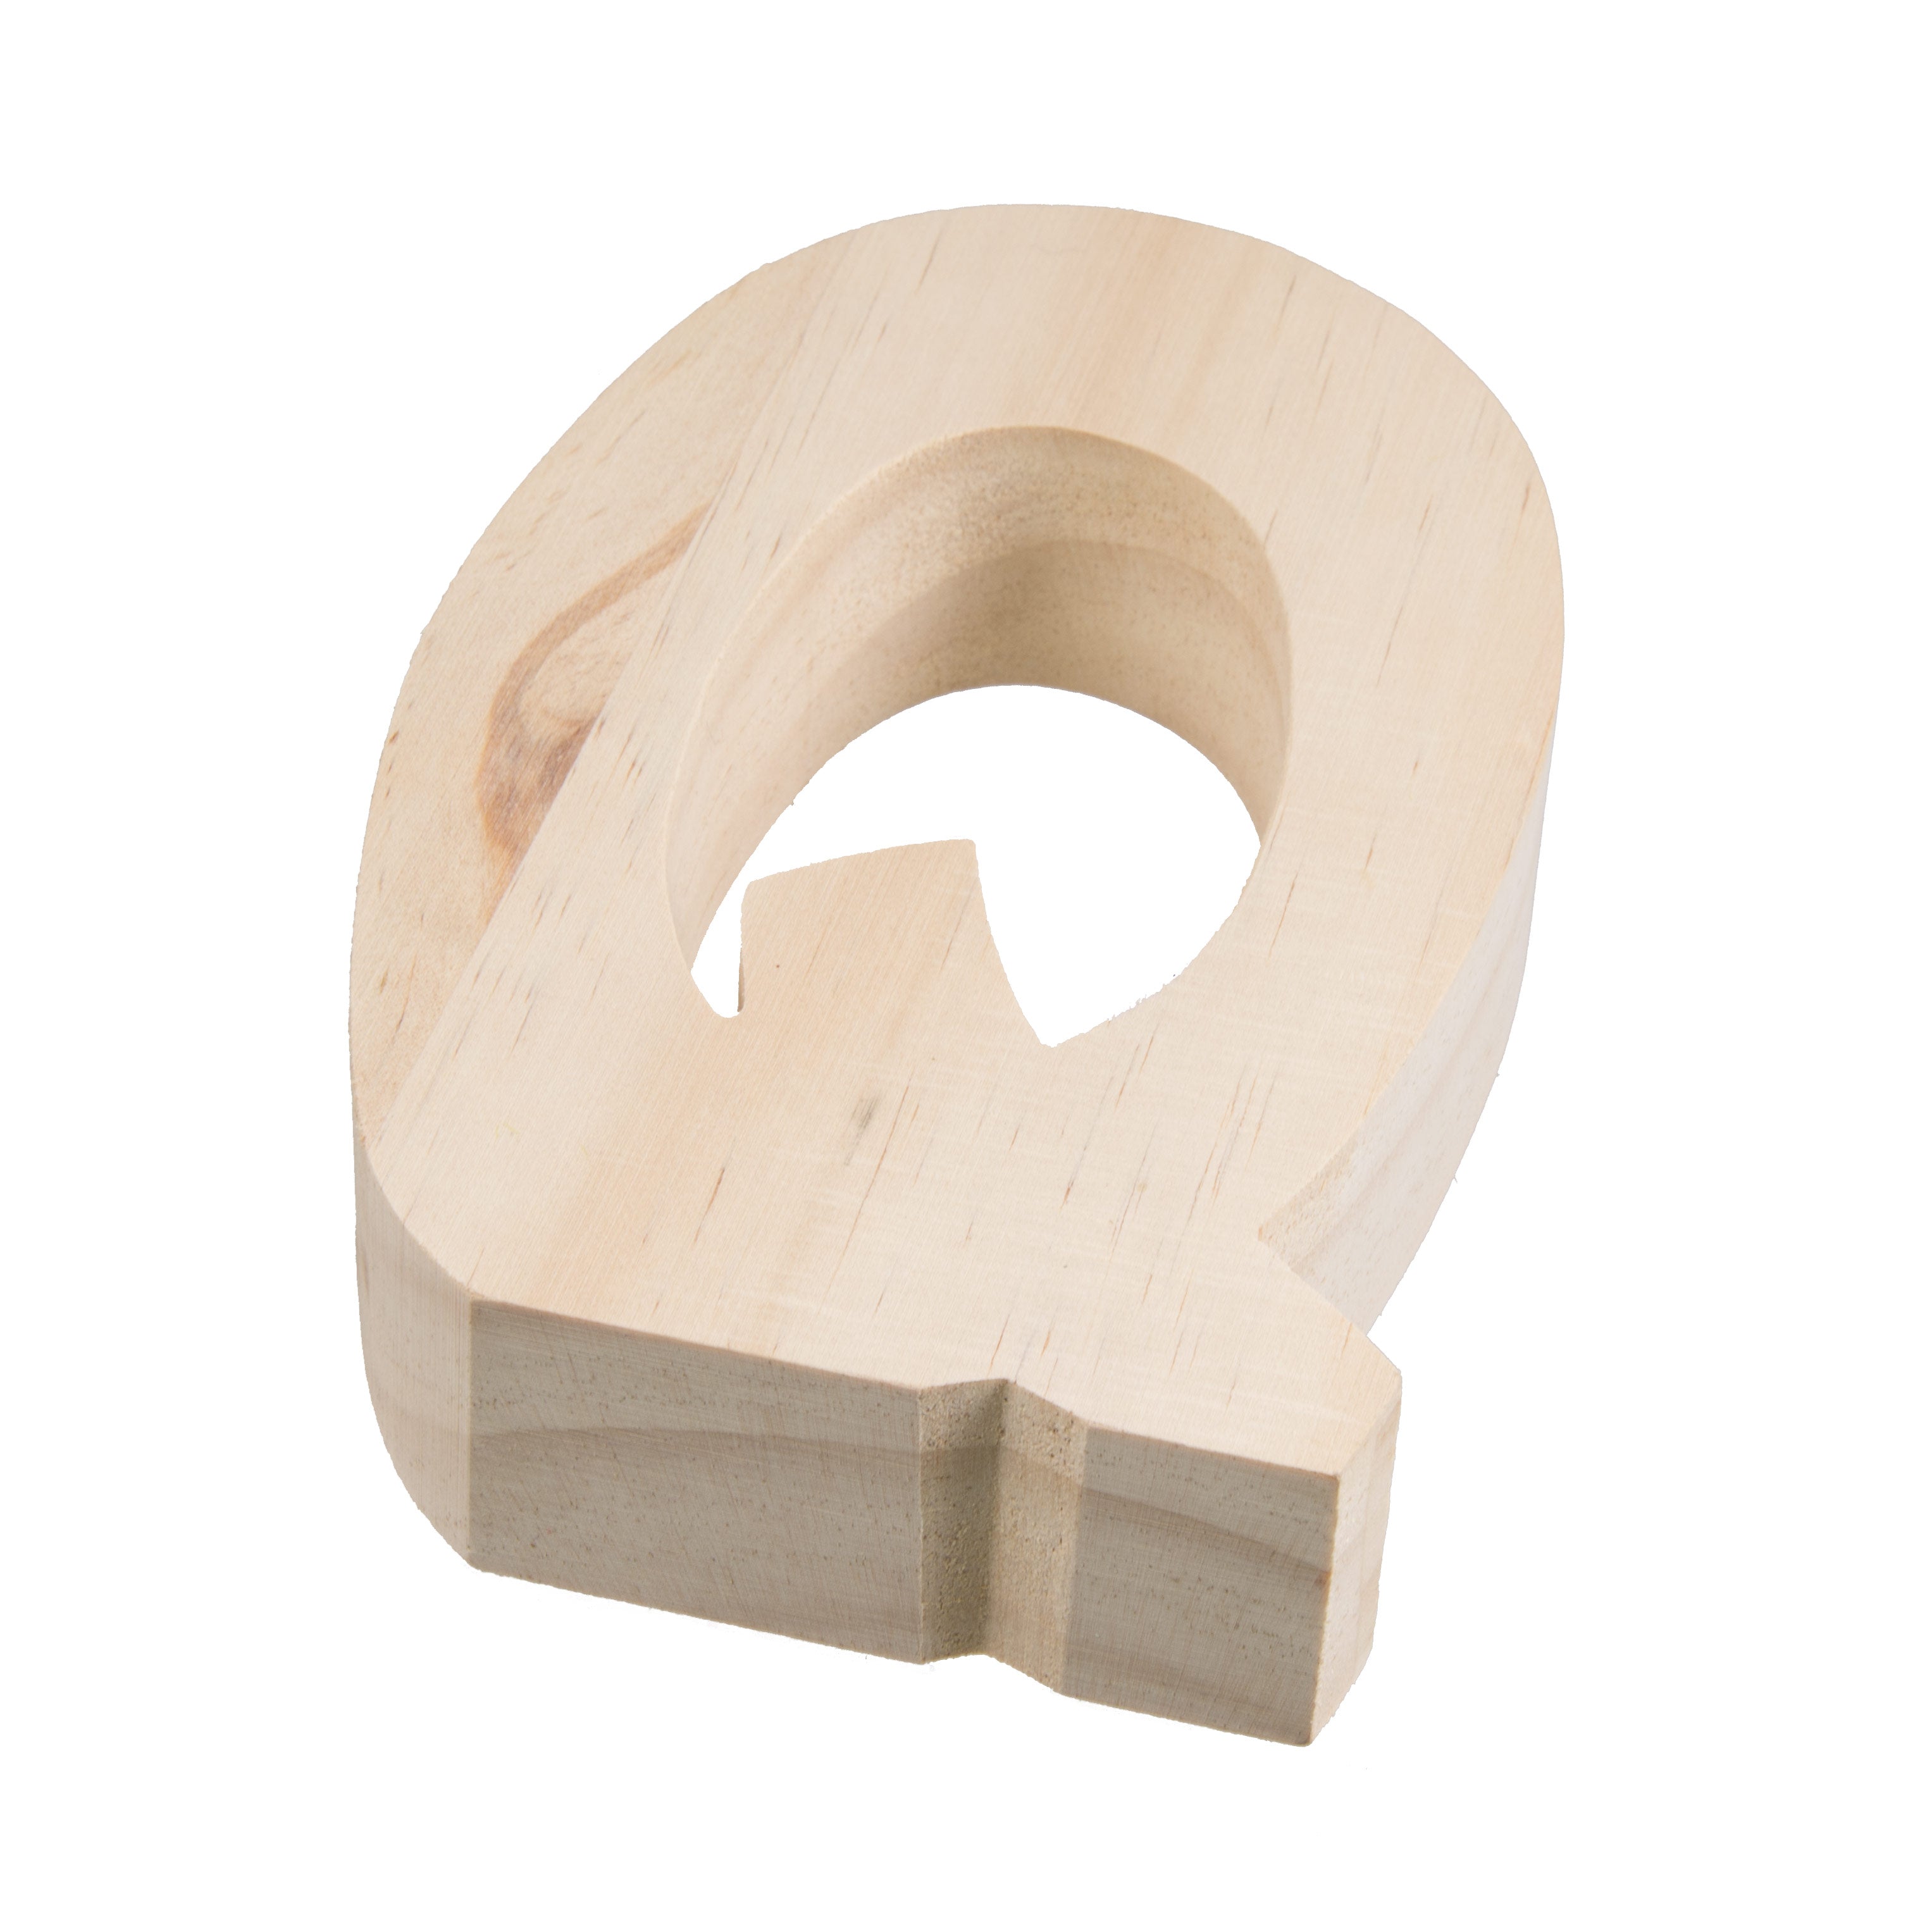 7.75" Chunky Wooden Letter: Q